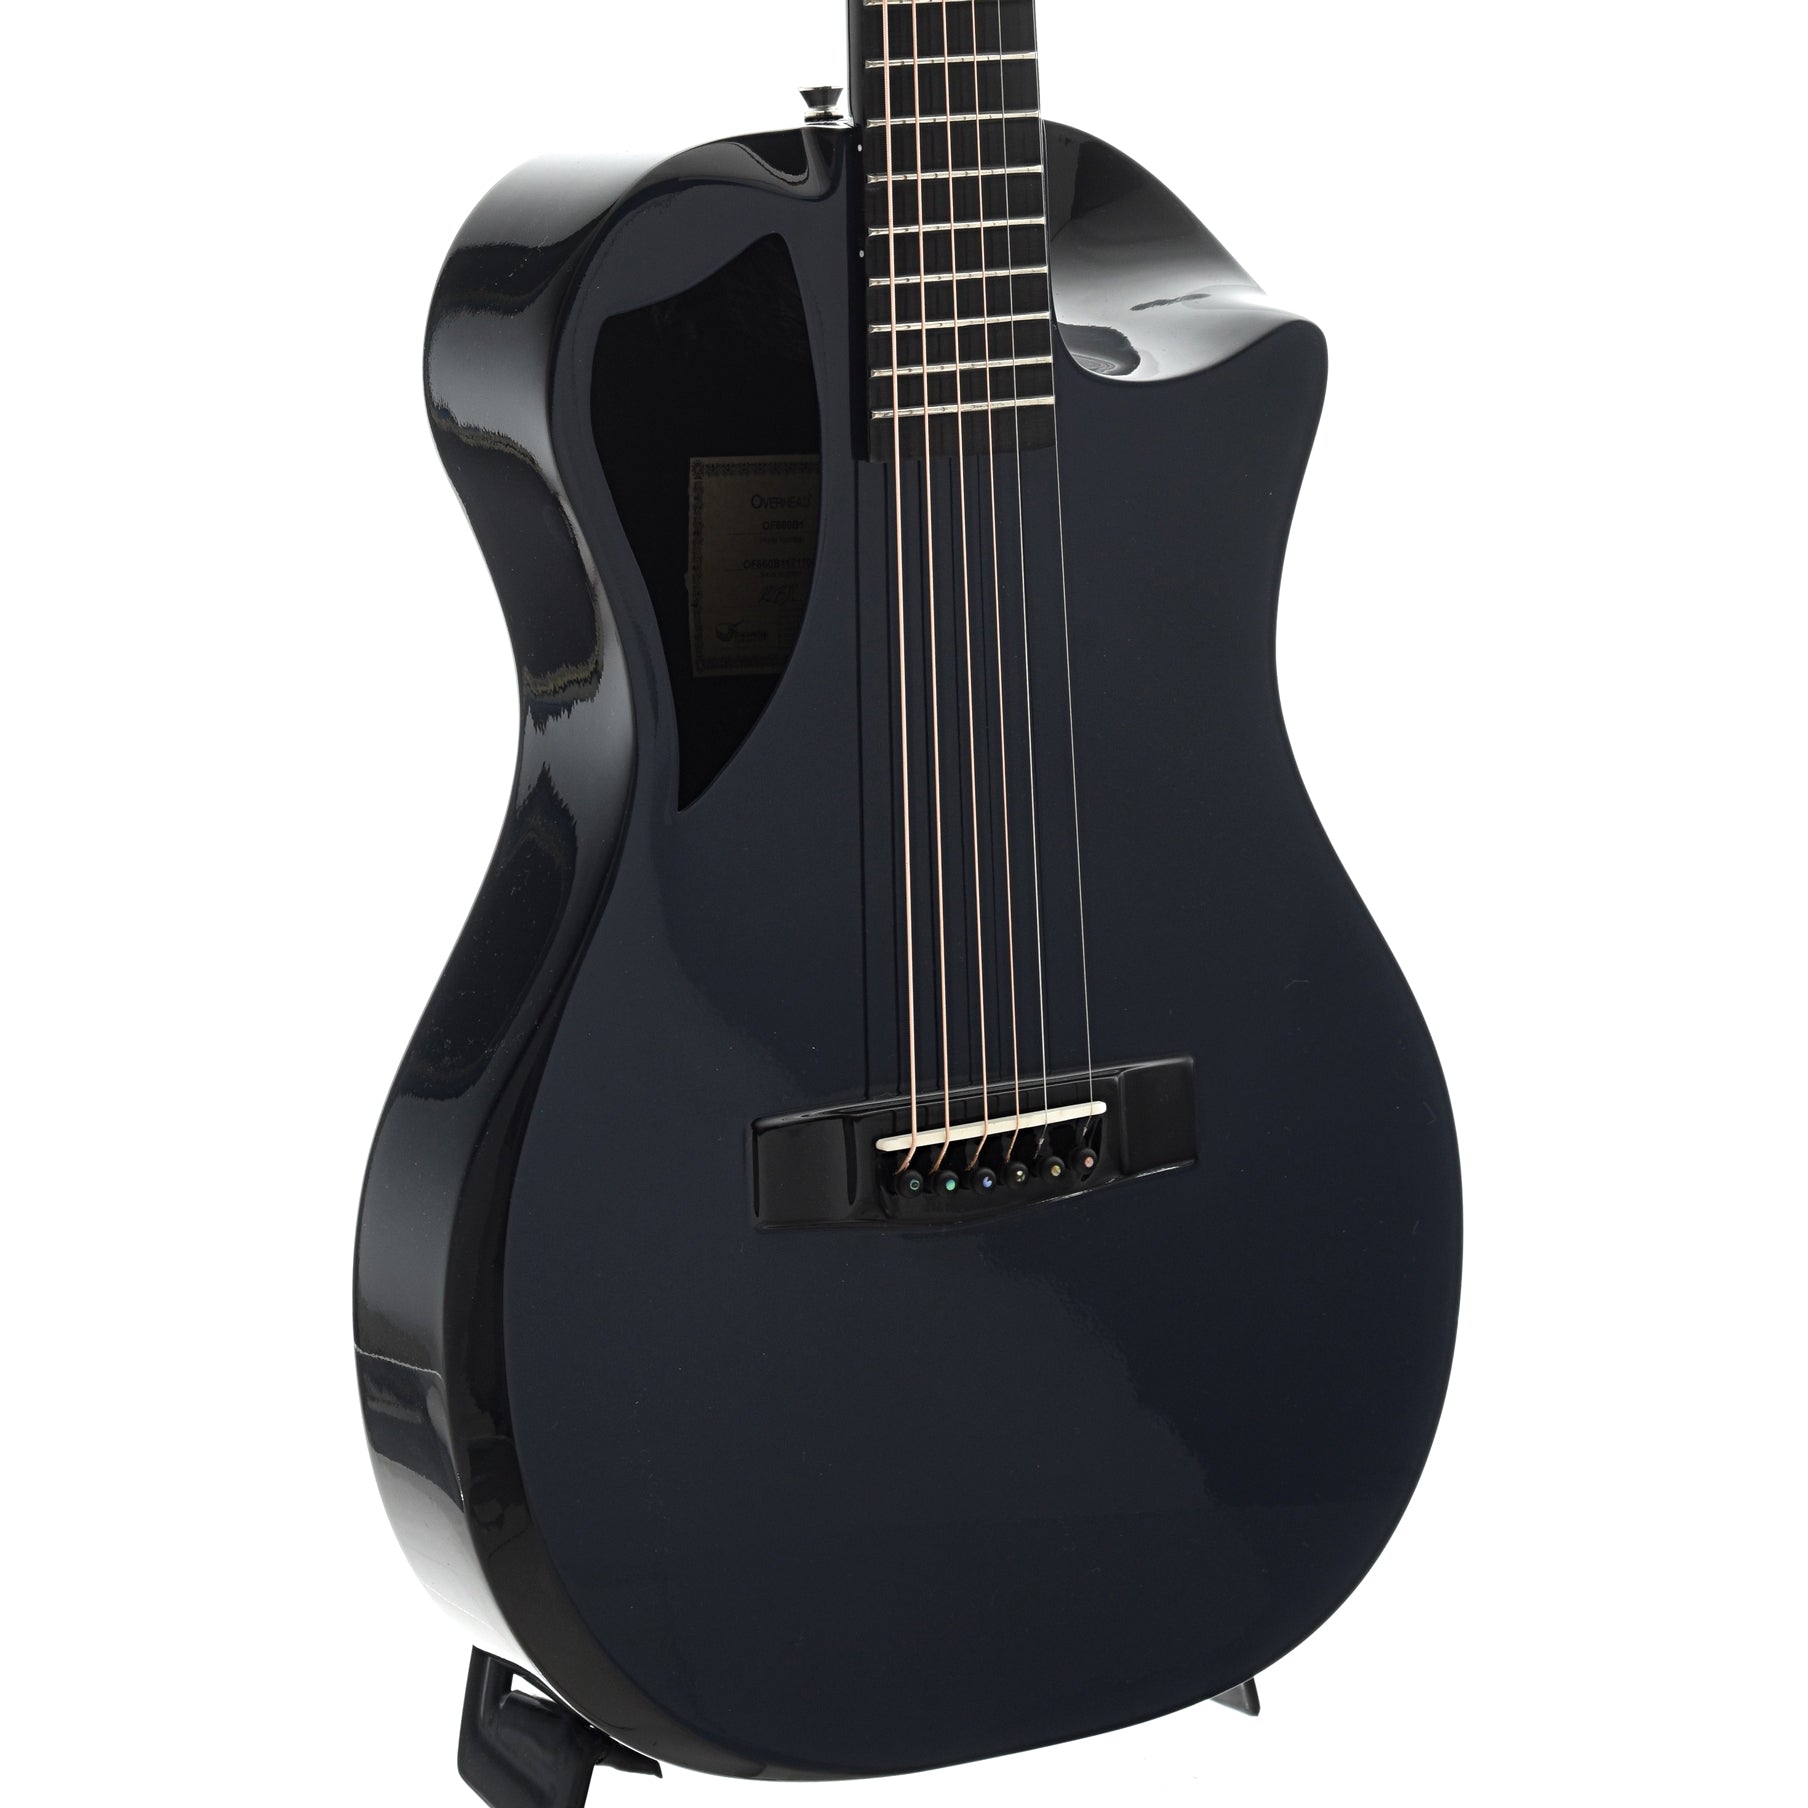 Image 2 of Journey Instruments OF660 Carbon Fiber Collapsible Travel Guitar with Gigbag, Navy Blue Top - SKU# OF660CT-B : Product Type Flat-top Guitars : Elderly Instruments